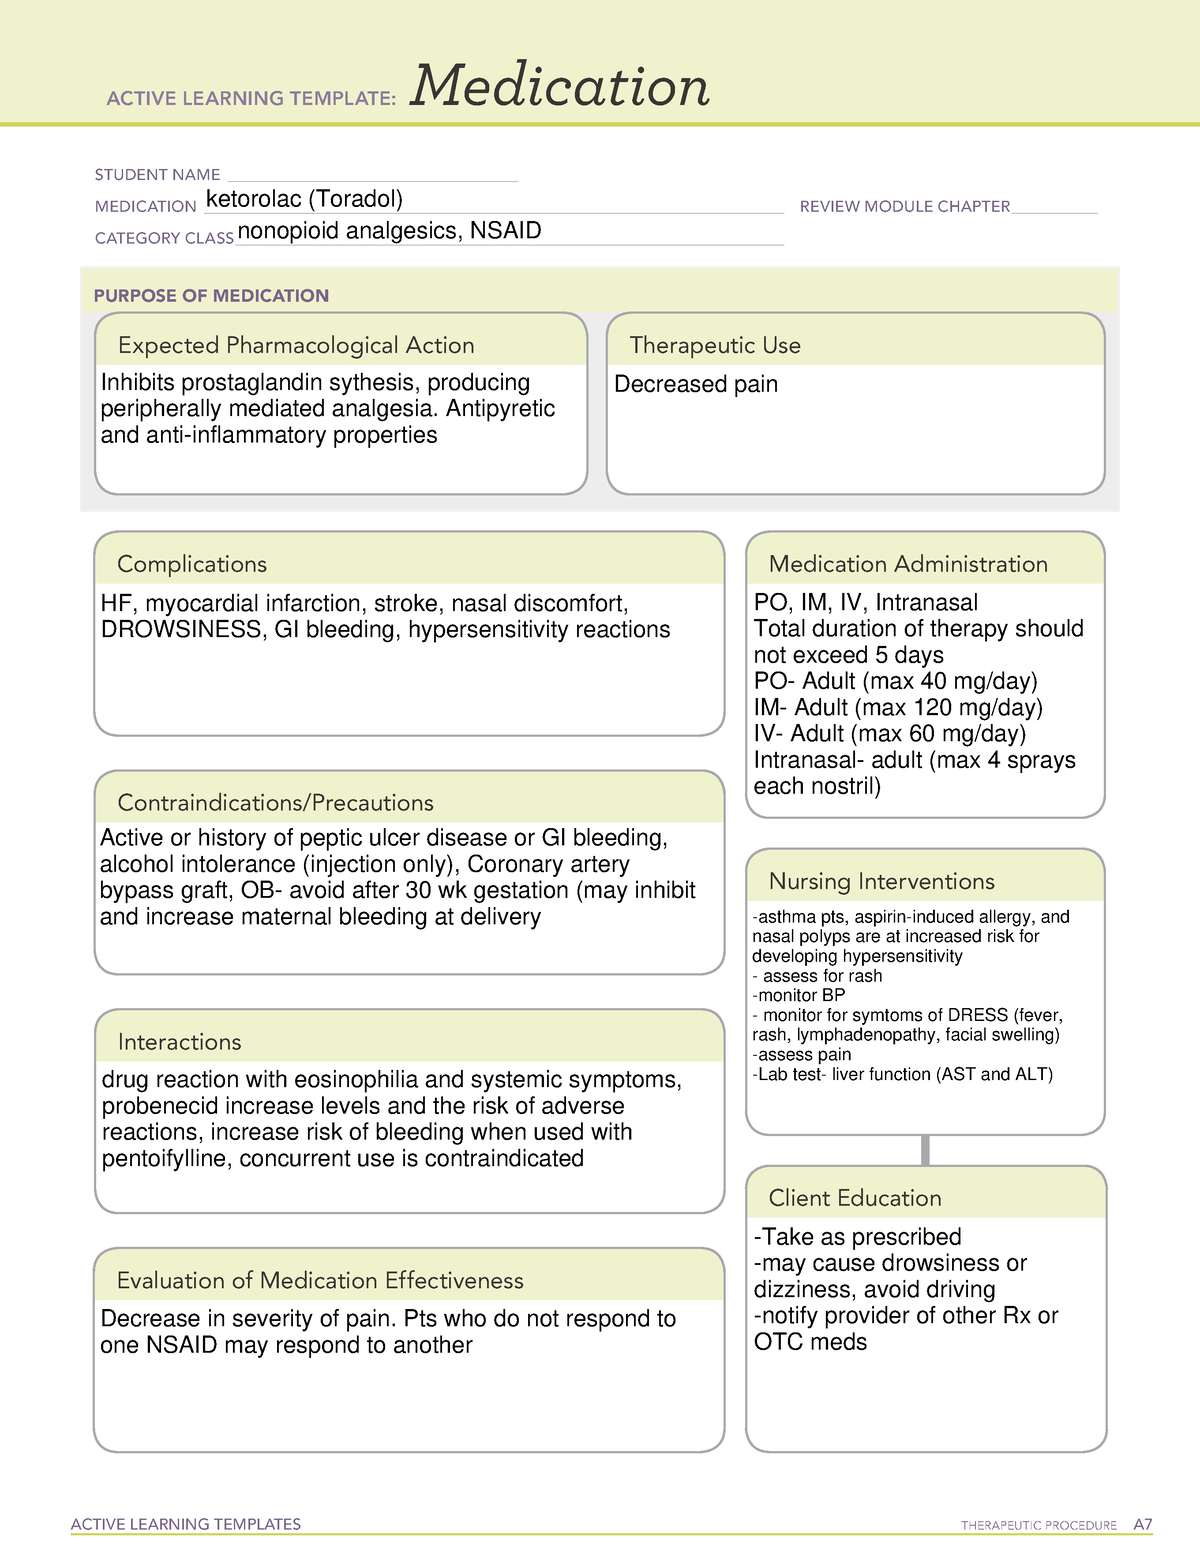 Ketorolac (Toradol) Med sheets ACTIVE LEARNING TEMPLATES THERAPEUTIC PROCEDURE A Medication